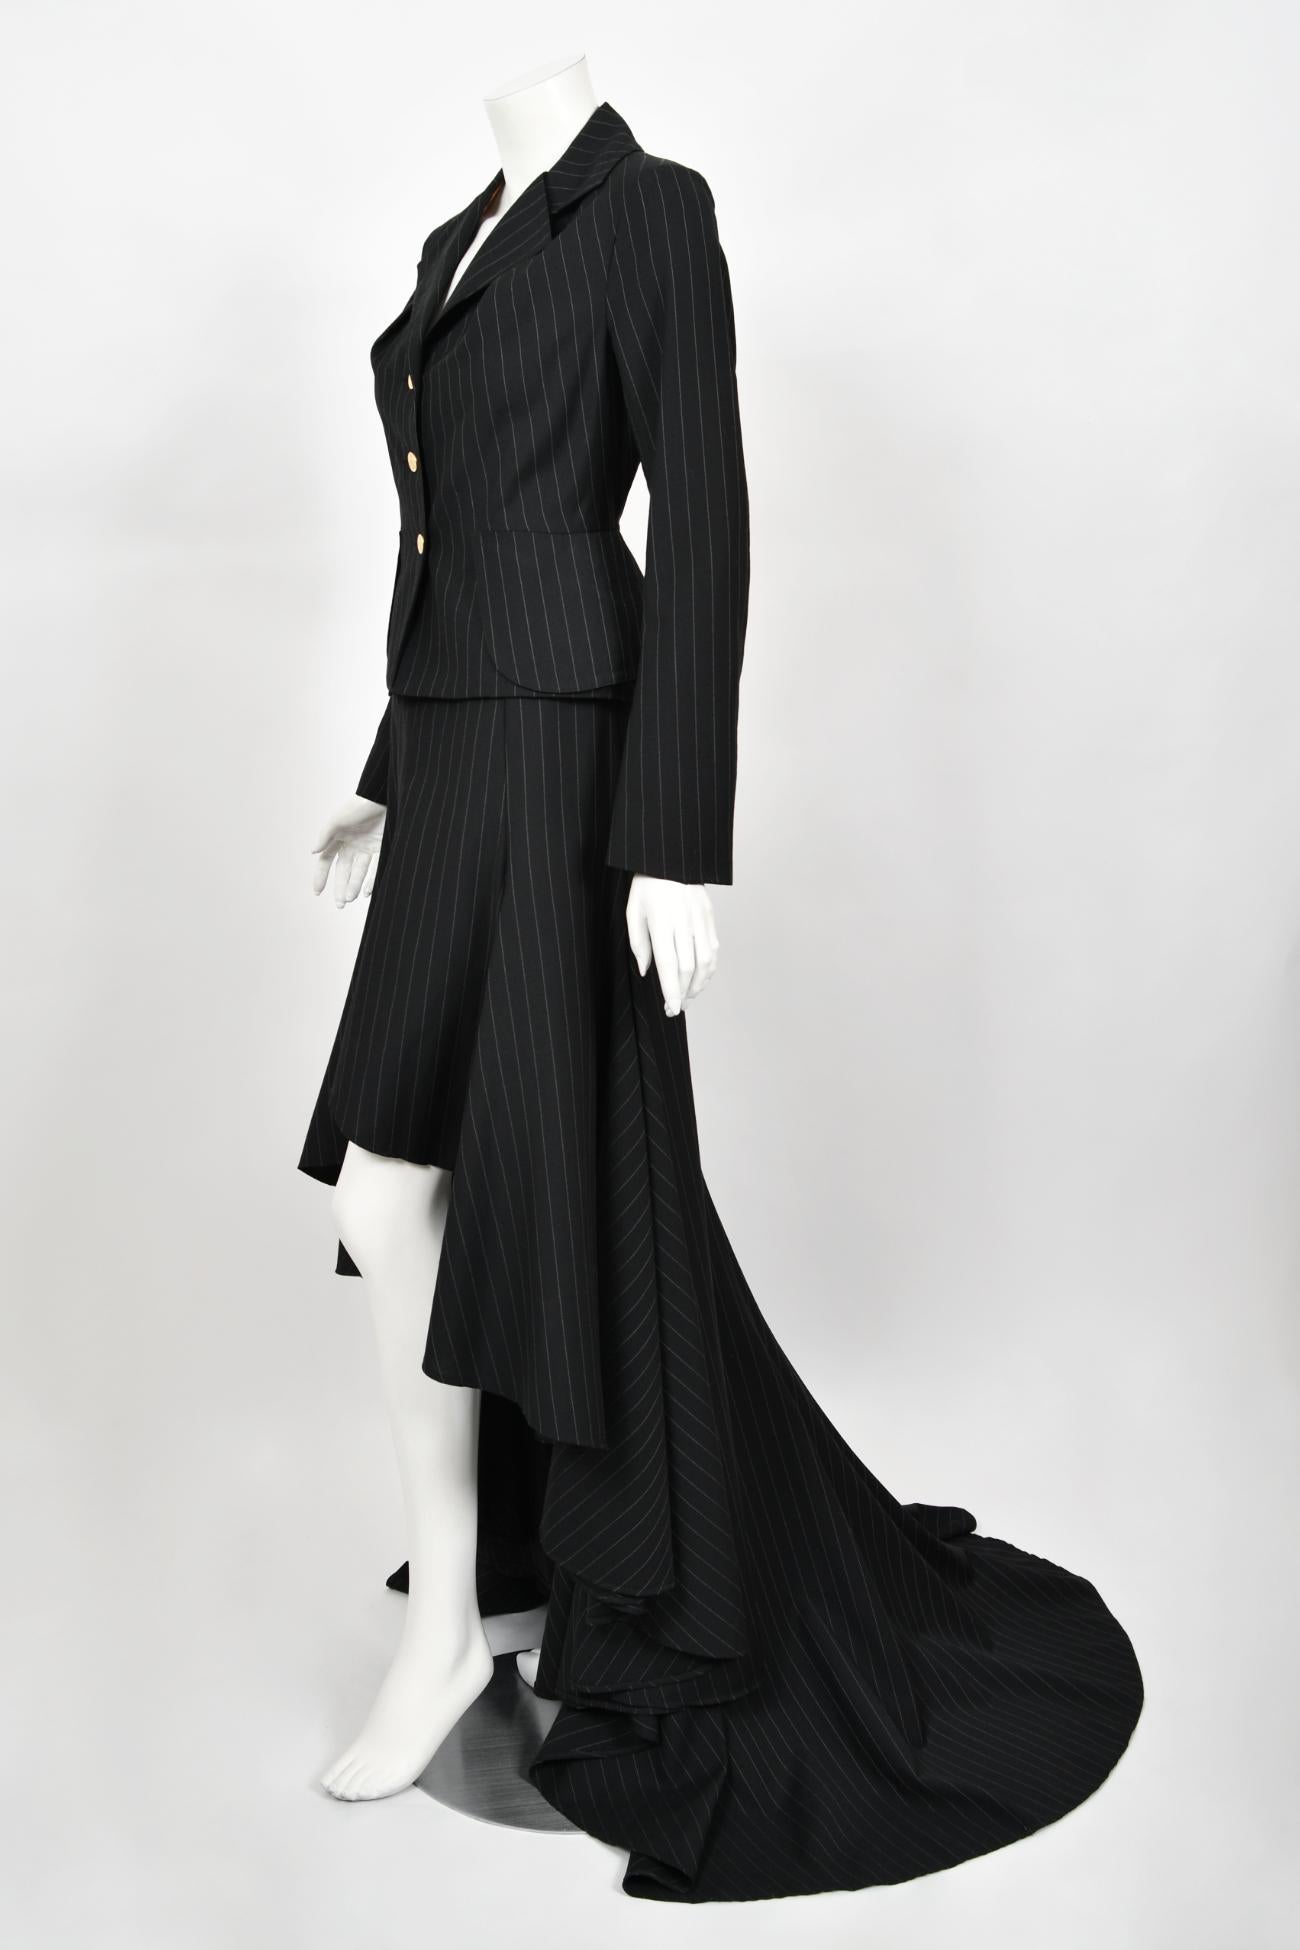 Archival 1994 Vivienne Westwood Pinstripe Wool Jacket and High-Low Trained Skirt For Sale 5